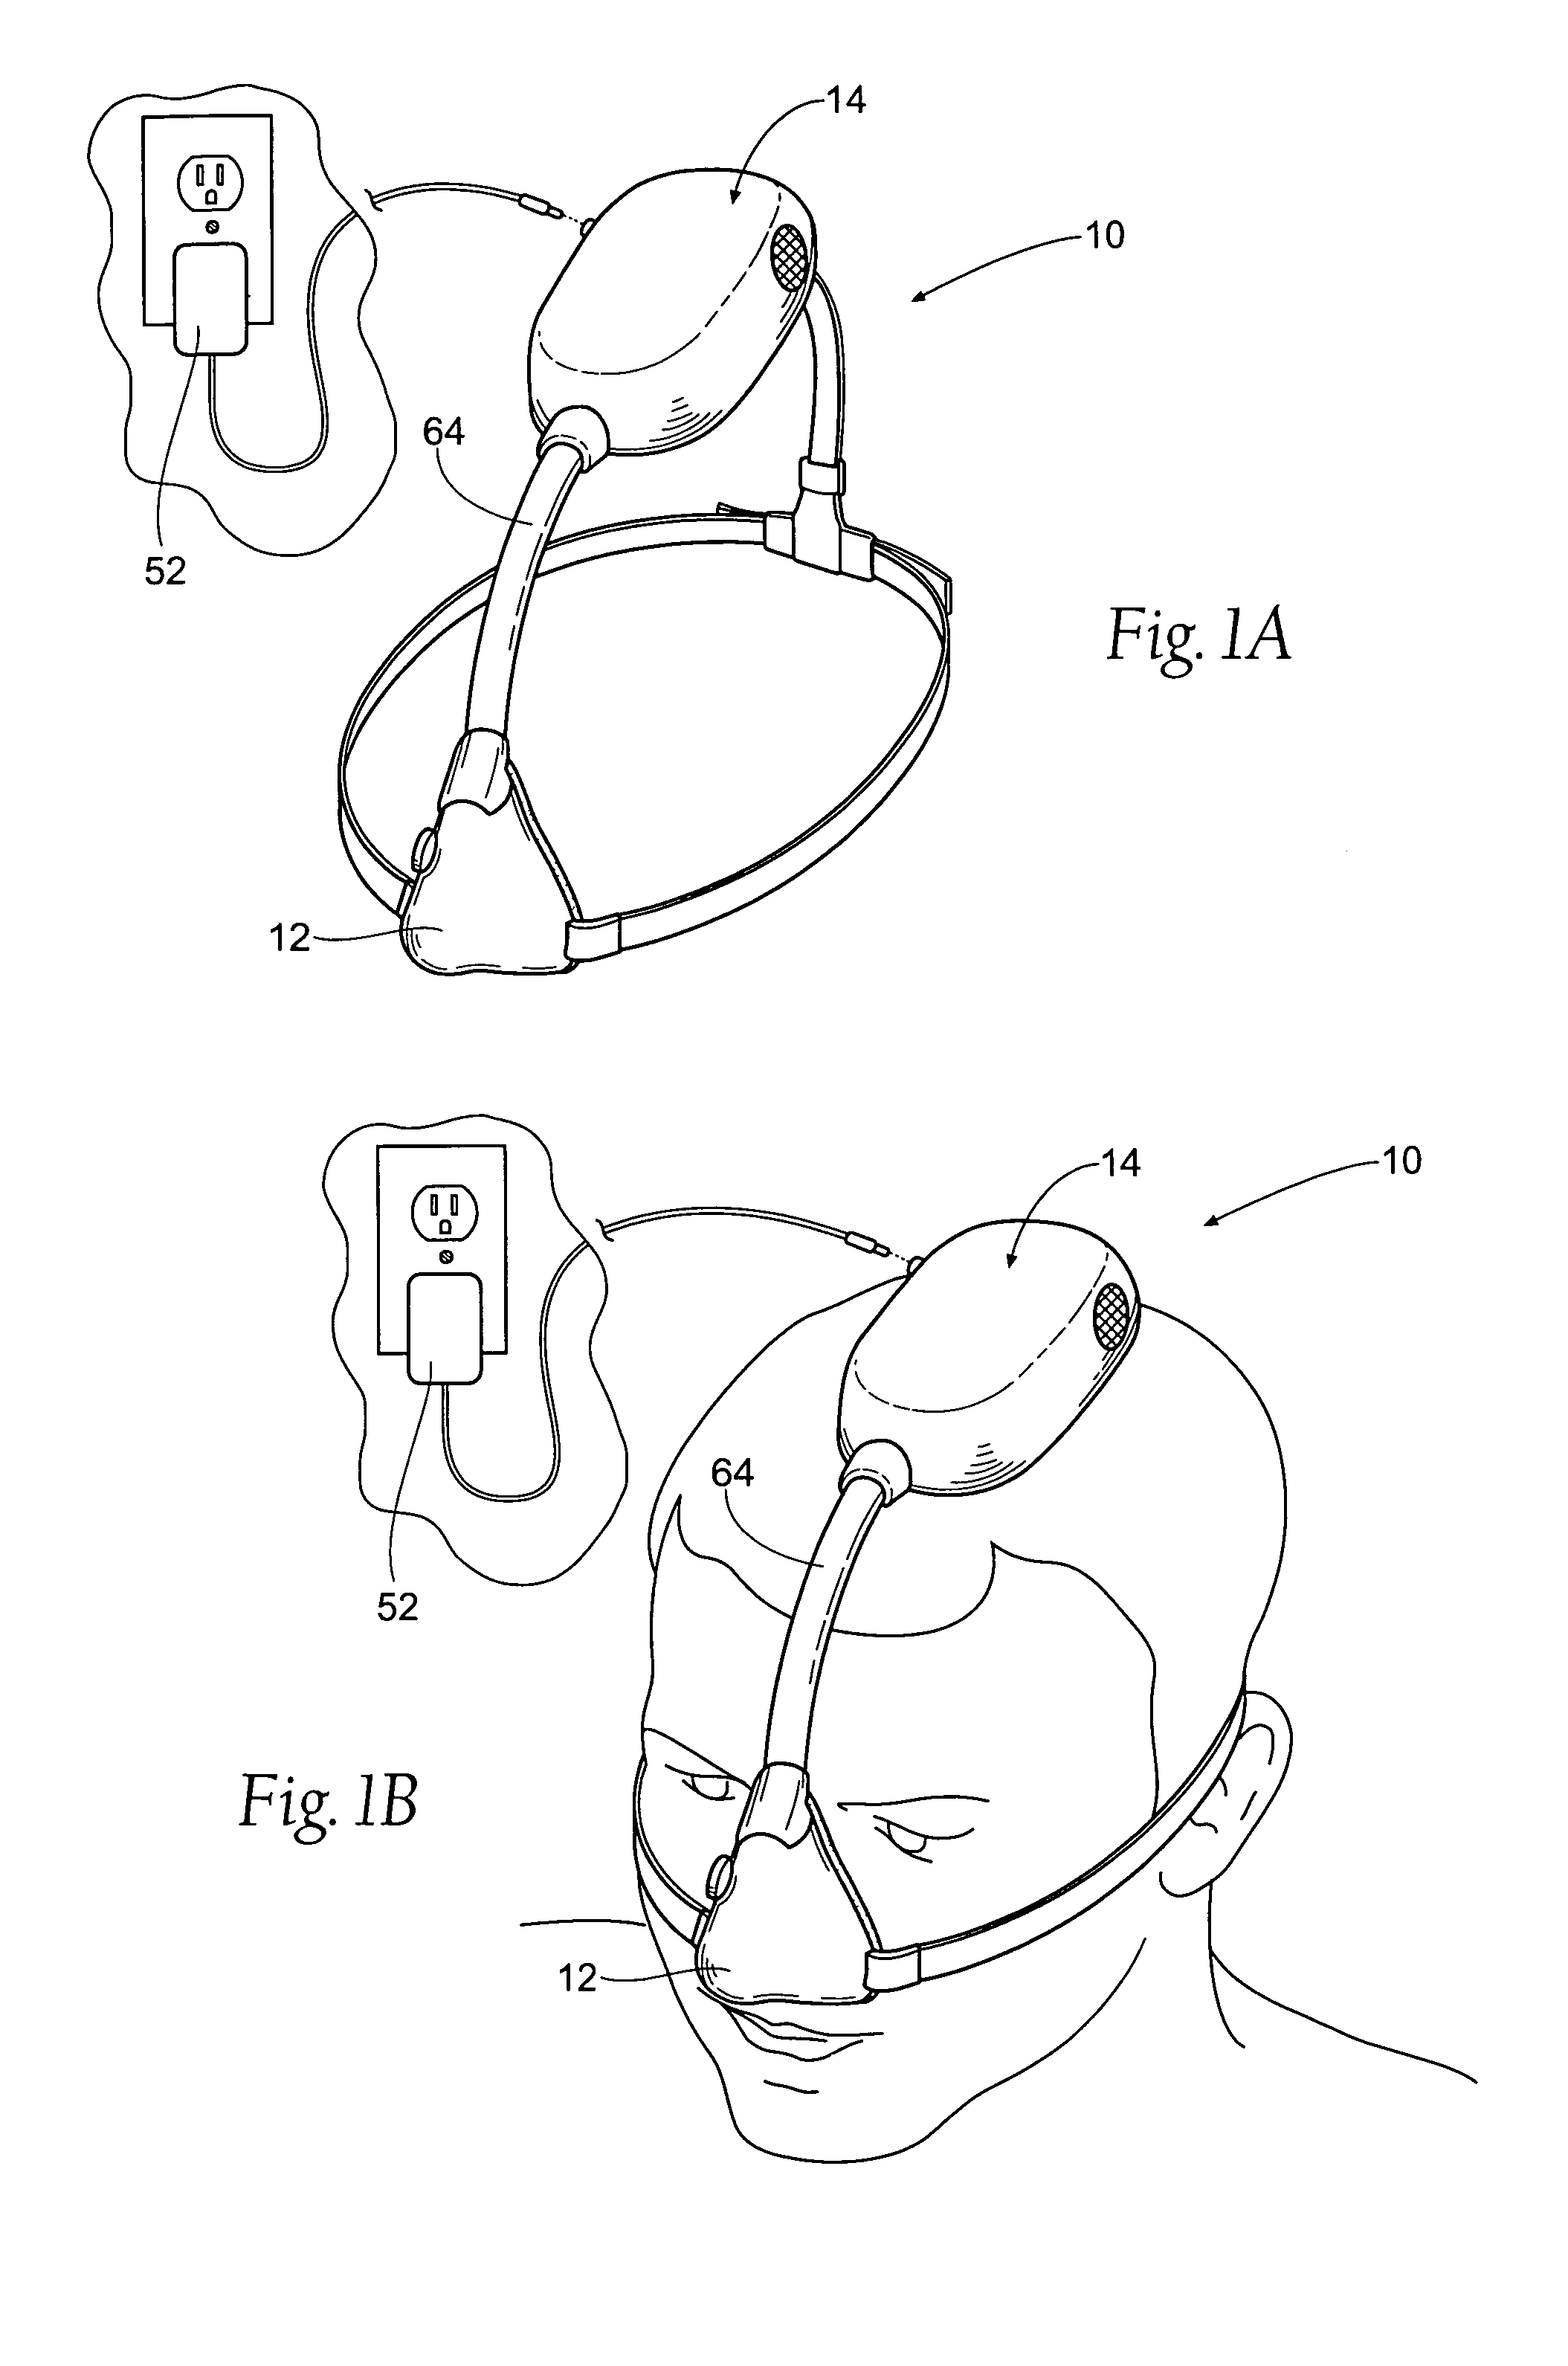 Self-contained, intermittent positive airway pressure systems and methods for treating sleep apnea, snoring, and other respiratory disorders